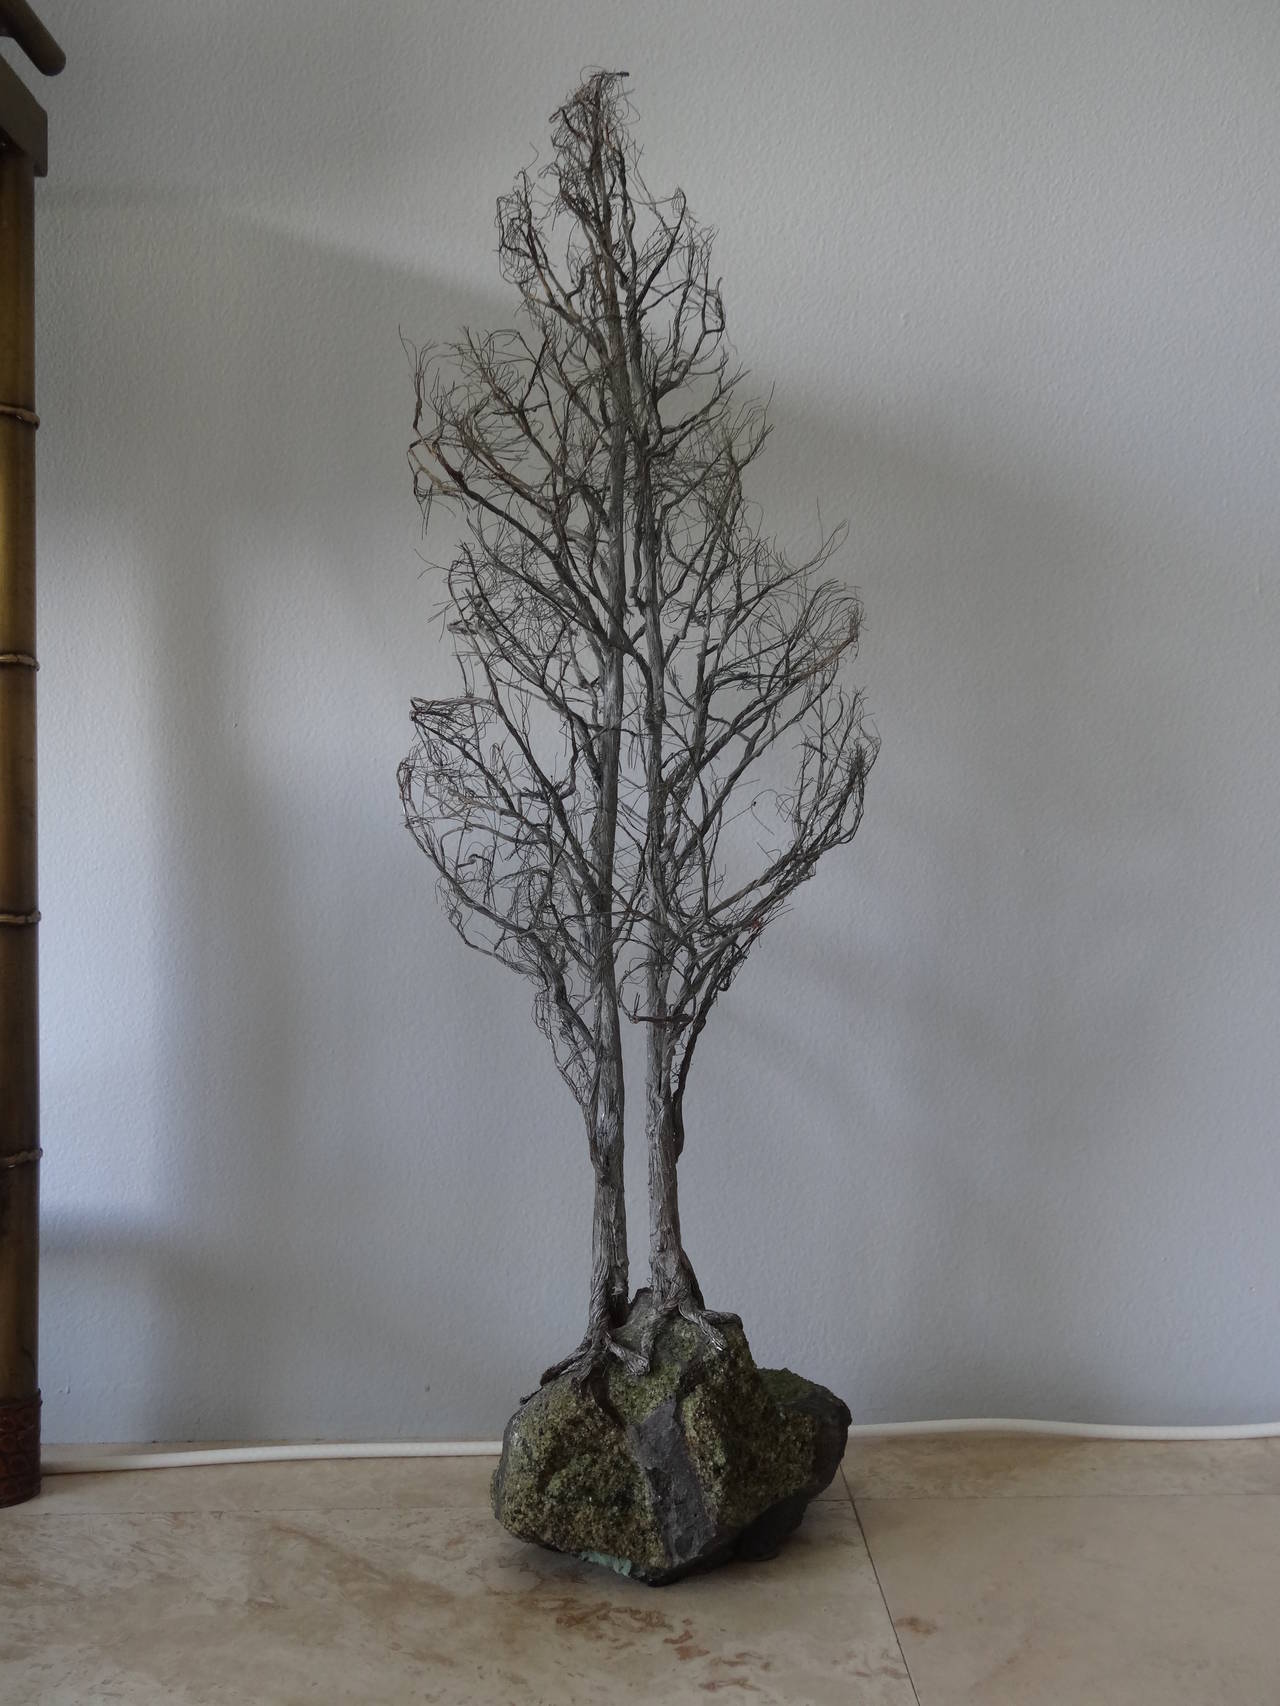 A silvered metal tree mounted on a geod.
Beautifully detailed and finished with the branches having this fine feathered looked.
Great size